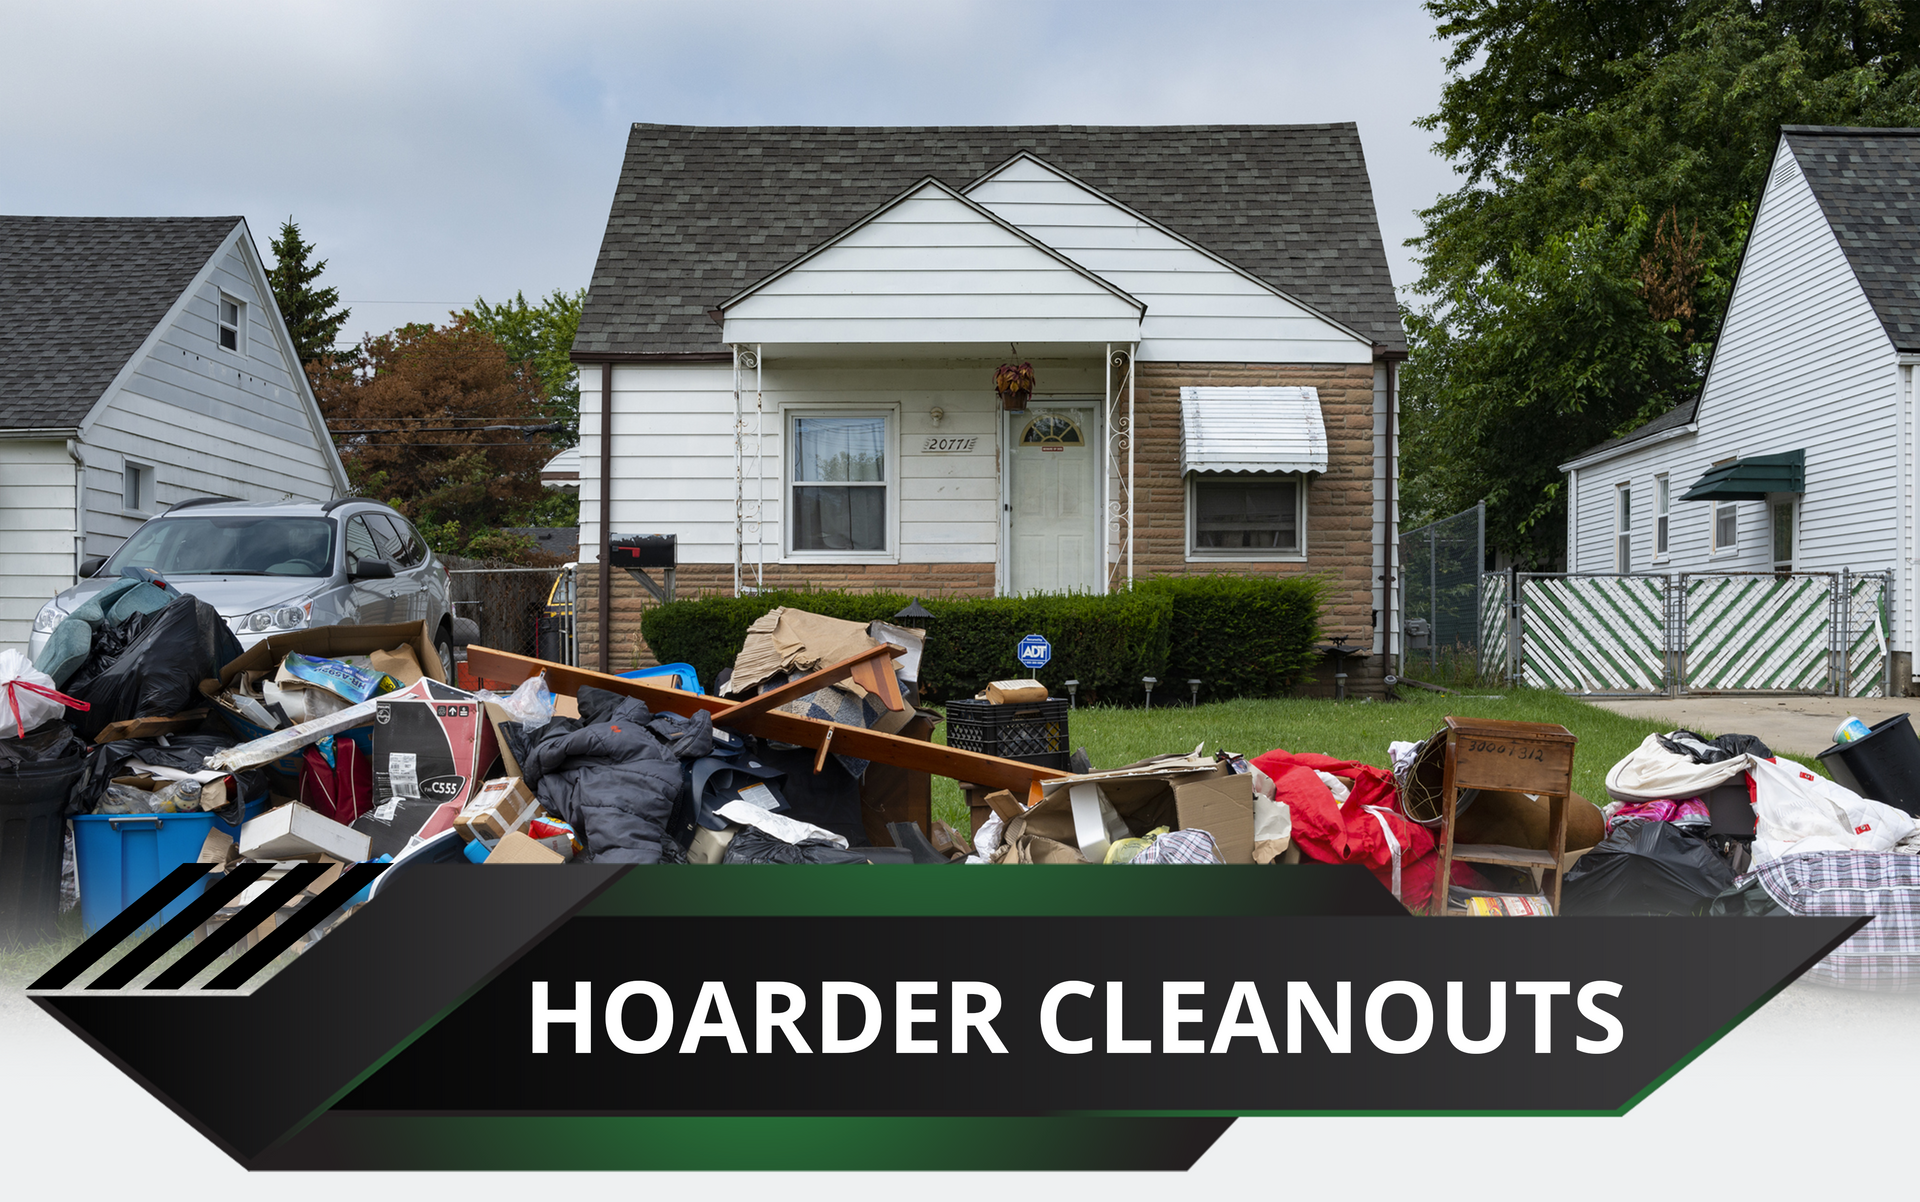 Hoarder Cleanouts in Sanger, CA